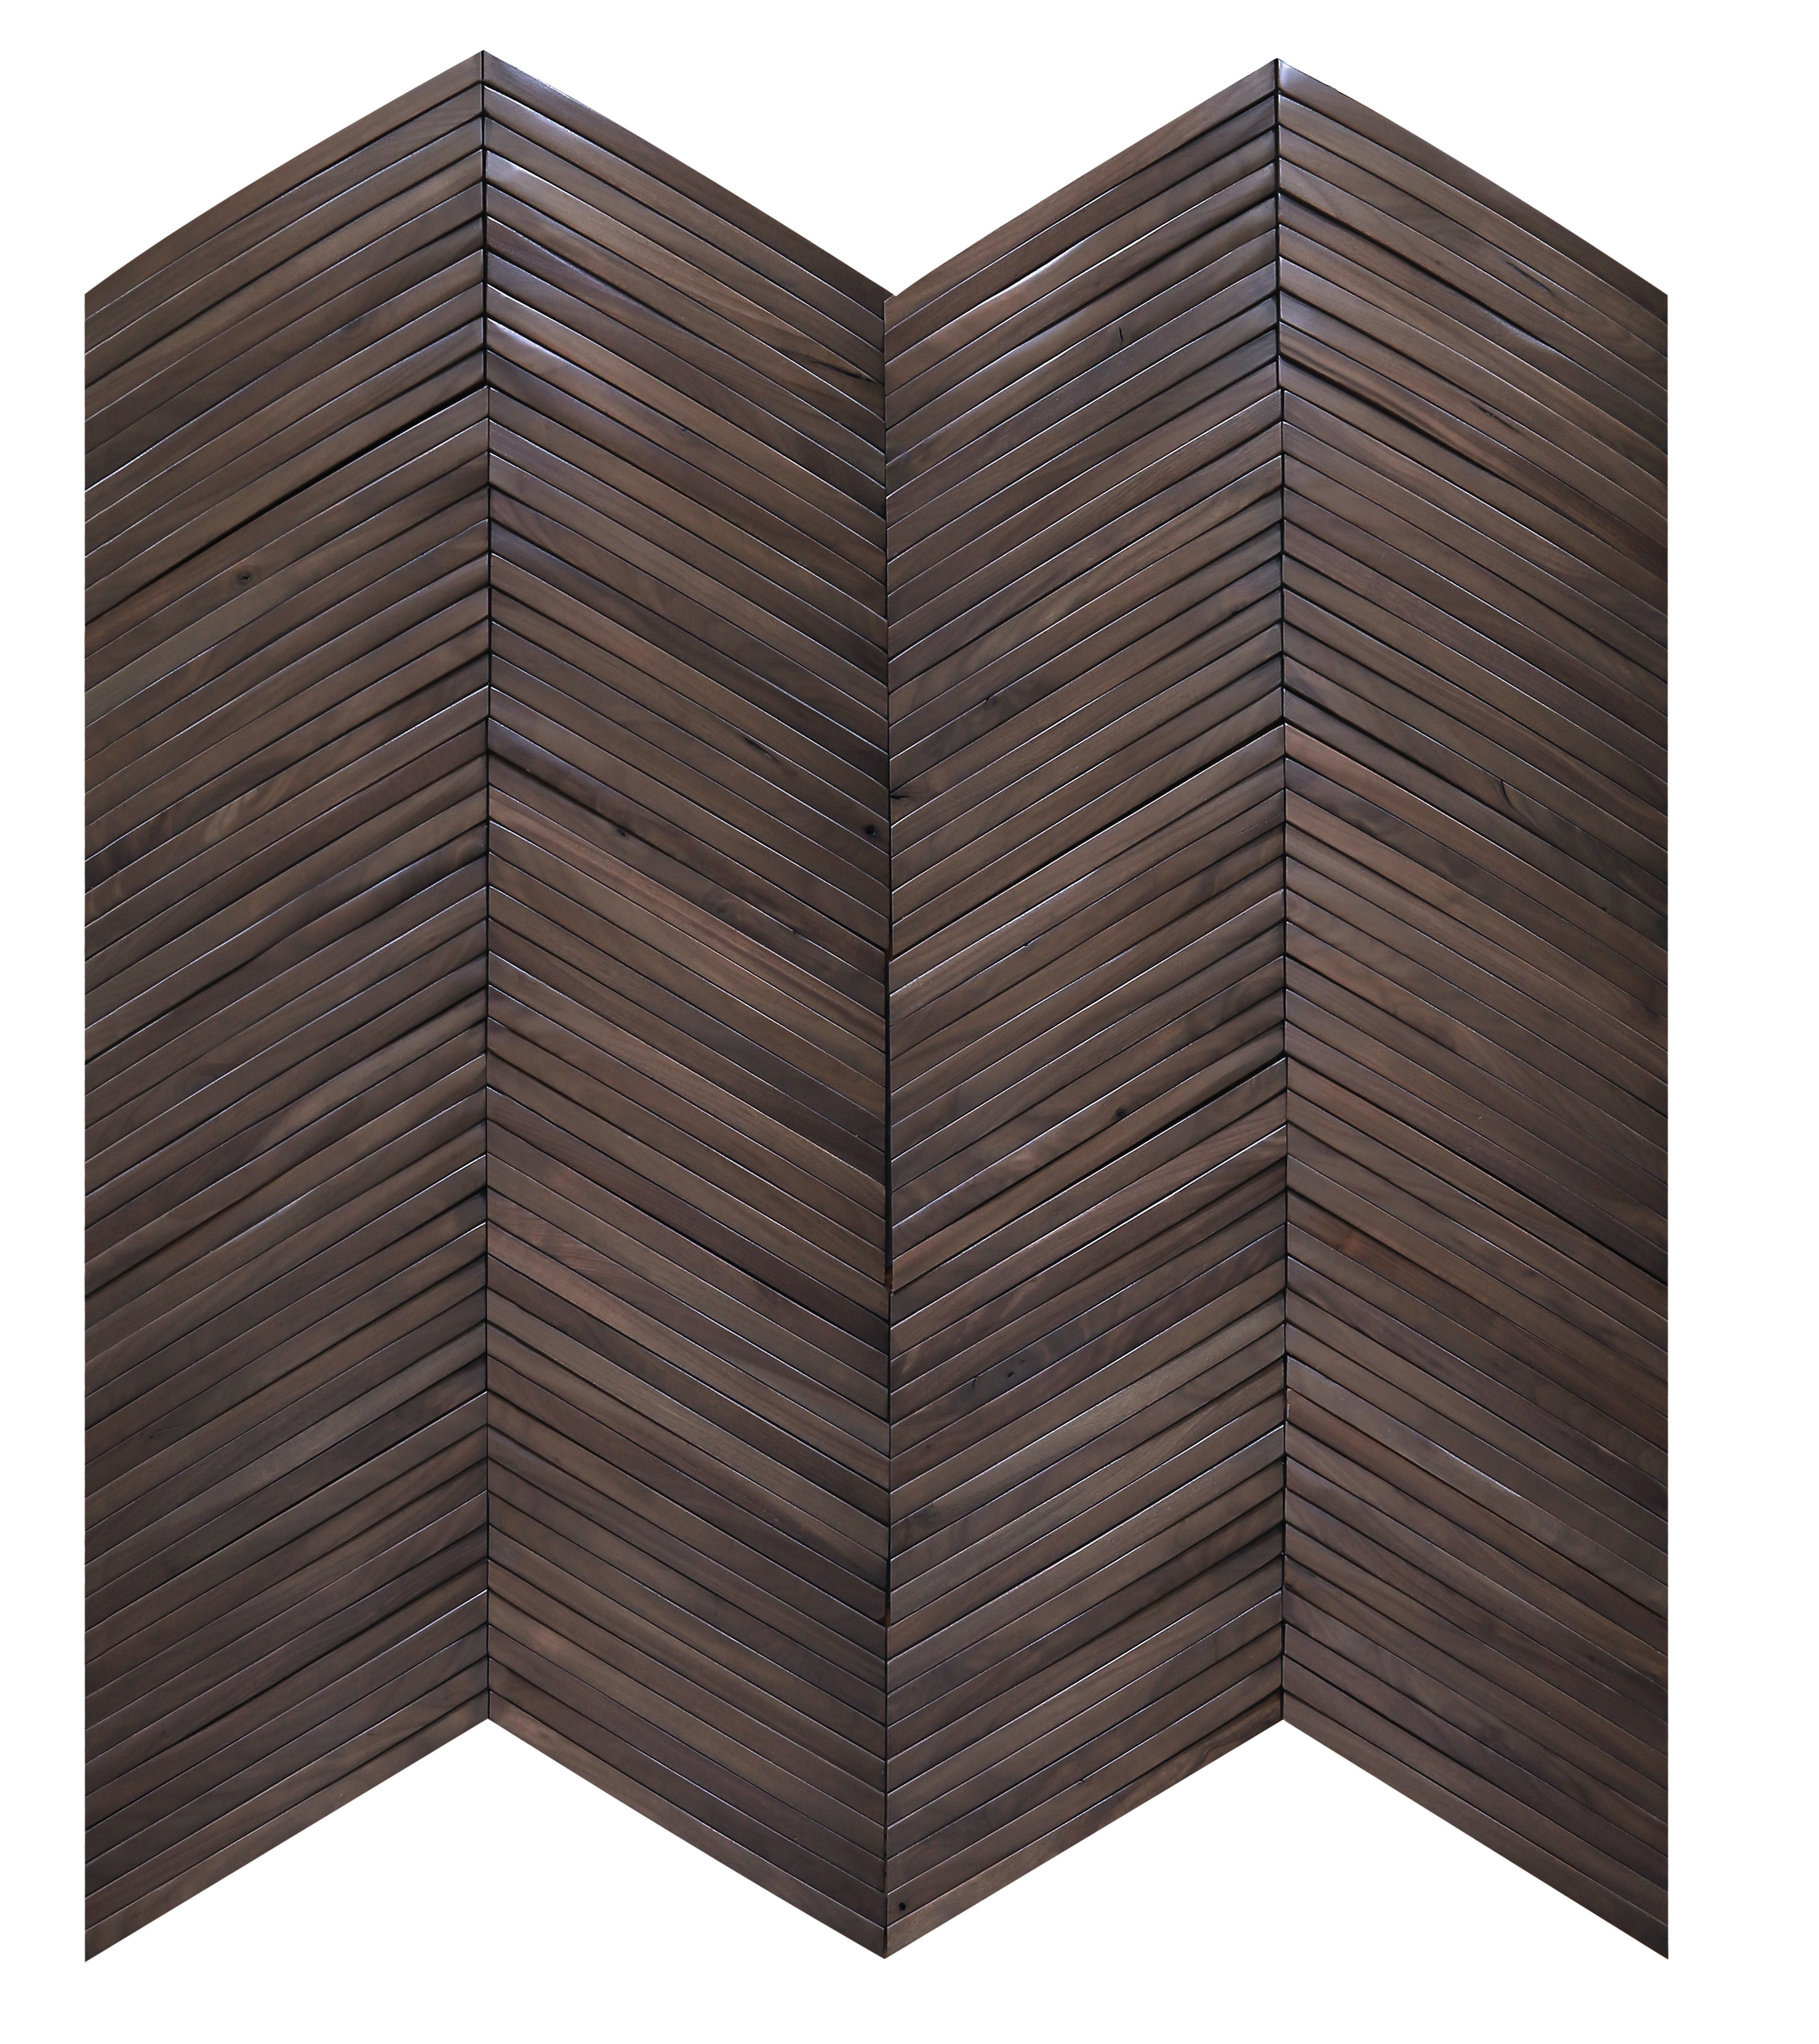 duchateau inceptiv ark chevron brown ash walnut three dimensional wall natural wood panel conversion varnish for interior use distributed by surface group international